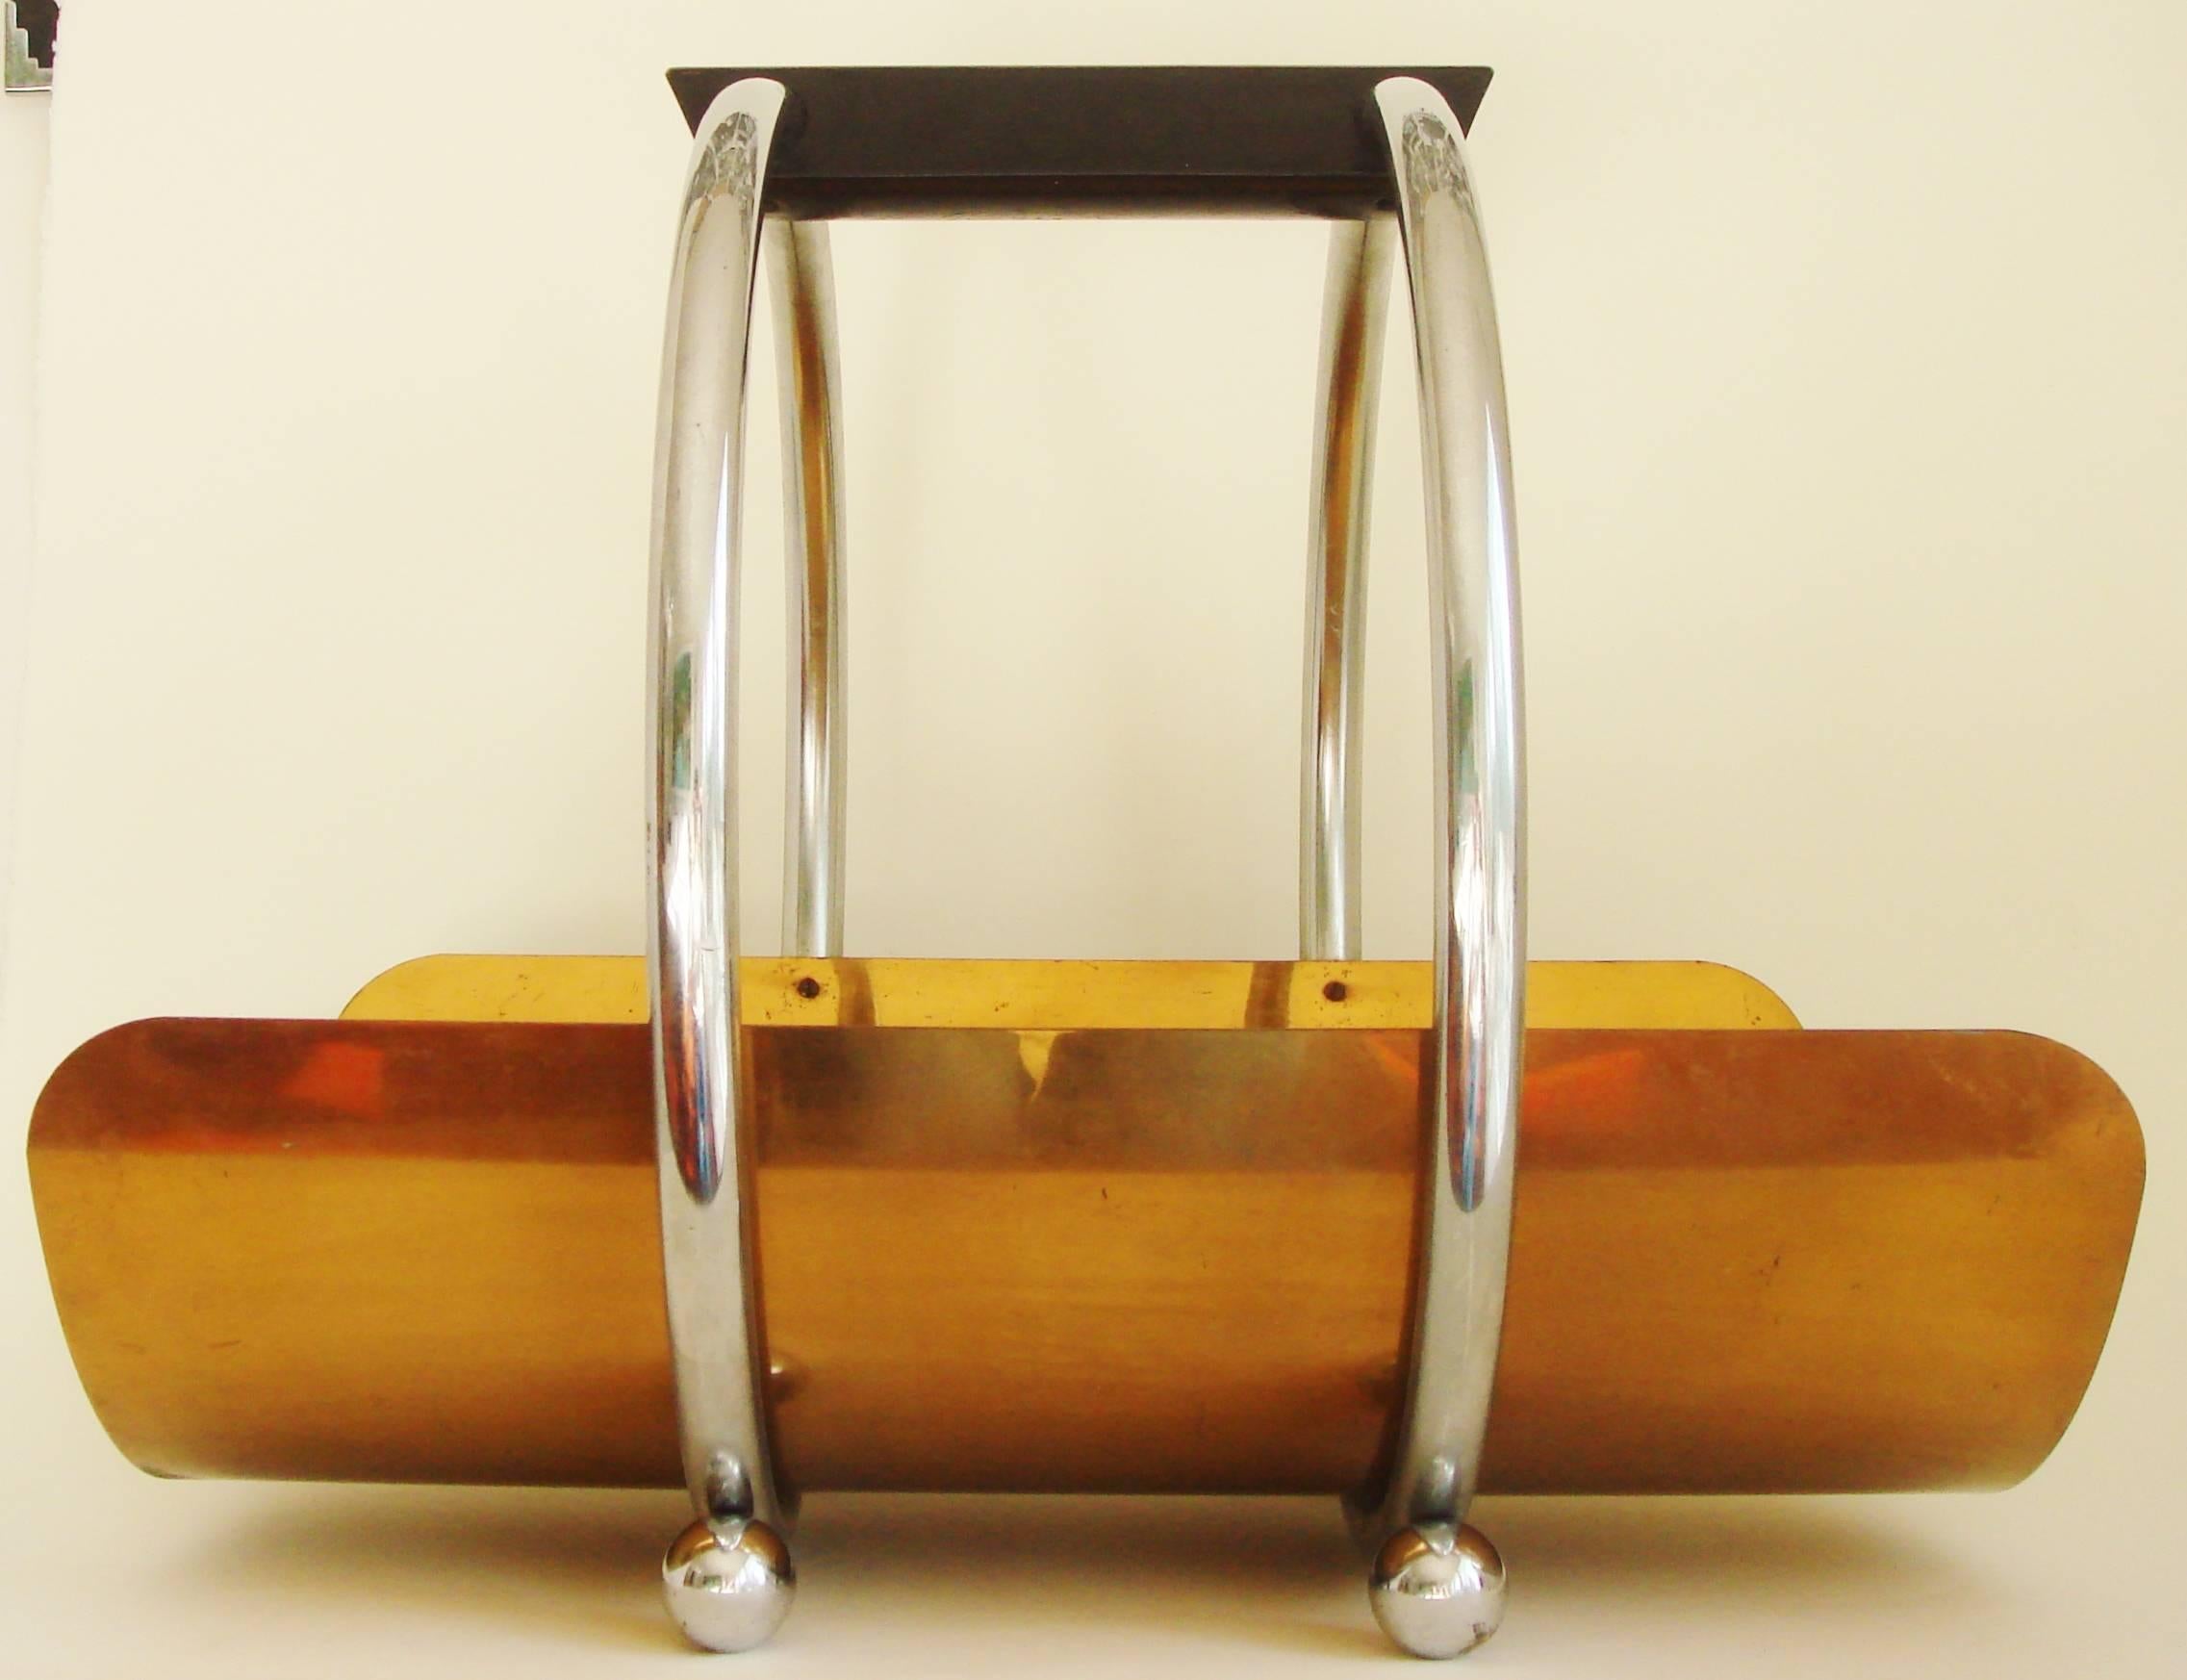 This Iconic American Art Deco log holder/magazine rack was designed by Leslie Beaton for the Revere Brass and Copper Company of Rome, New York. It first appeared in the Revere Gifts catalogue for 1937 where it was named the 